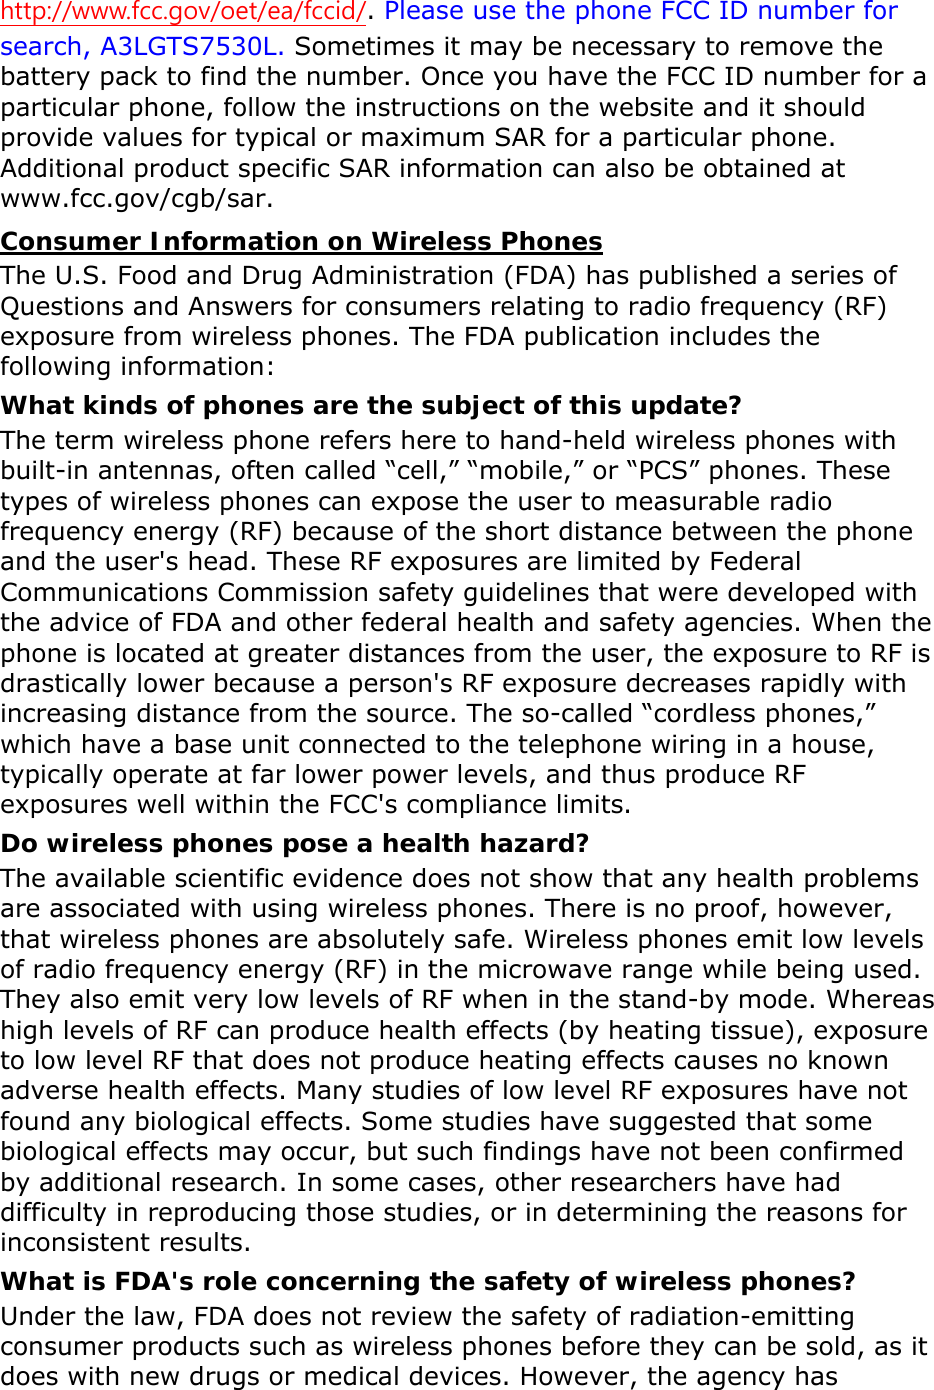 http://www.fcc.gov/oet/ea/fccid/. Please use the phone FCC ID number for search, A3LGTS7530L. Sometimes it may be necessary to remove the battery pack to find the number. Once you have the FCC ID number for a particular phone, follow the instructions on the website and it should provide values for typical or maximum SAR for a particular phone. Additional product specific SAR information can also be obtained at www.fcc.gov/cgb/sar. Consumer Information on Wireless Phones The U.S. Food and Drug Administration (FDA) has published a series of Questions and Answers for consumers relating to radio frequency (RF) exposure from wireless phones. The FDA publication includes the following information: What kinds of phones are the subject of this update? The term wireless phone refers here to hand-held wireless phones with built-in antennas, often called “cell,” “mobile,” or “PCS” phones. These types of wireless phones can expose the user to measurable radio frequency energy (RF) because of the short distance between the phone and the user&apos;s head. These RF exposures are limited by Federal Communications Commission safety guidelines that were developed with the advice of FDA and other federal health and safety agencies. When the phone is located at greater distances from the user, the exposure to RF is drastically lower because a person&apos;s RF exposure decreases rapidly with increasing distance from the source. The so-called “cordless phones,” which have a base unit connected to the telephone wiring in a house, typically operate at far lower power levels, and thus produce RF exposures well within the FCC&apos;s compliance limits. Do wireless phones pose a health hazard? The available scientific evidence does not show that any health problems are associated with using wireless phones. There is no proof, however, that wireless phones are absolutely safe. Wireless phones emit low levels of radio frequency energy (RF) in the microwave range while being used. They also emit very low levels of RF when in the stand-by mode. Whereas high levels of RF can produce health effects (by heating tissue), exposure to low level RF that does not produce heating effects causes no known adverse health effects. Many studies of low level RF exposures have not found any biological effects. Some studies have suggested that some biological effects may occur, but such findings have not been confirmed by additional research. In some cases, other researchers have had difficulty in reproducing those studies, or in determining the reasons for inconsistent results. What is FDA&apos;s role concerning the safety of wireless phones? Under the law, FDA does not review the safety of radiation-emitting consumer products such as wireless phones before they can be sold, as it does with new drugs or medical devices. However, the agency has 